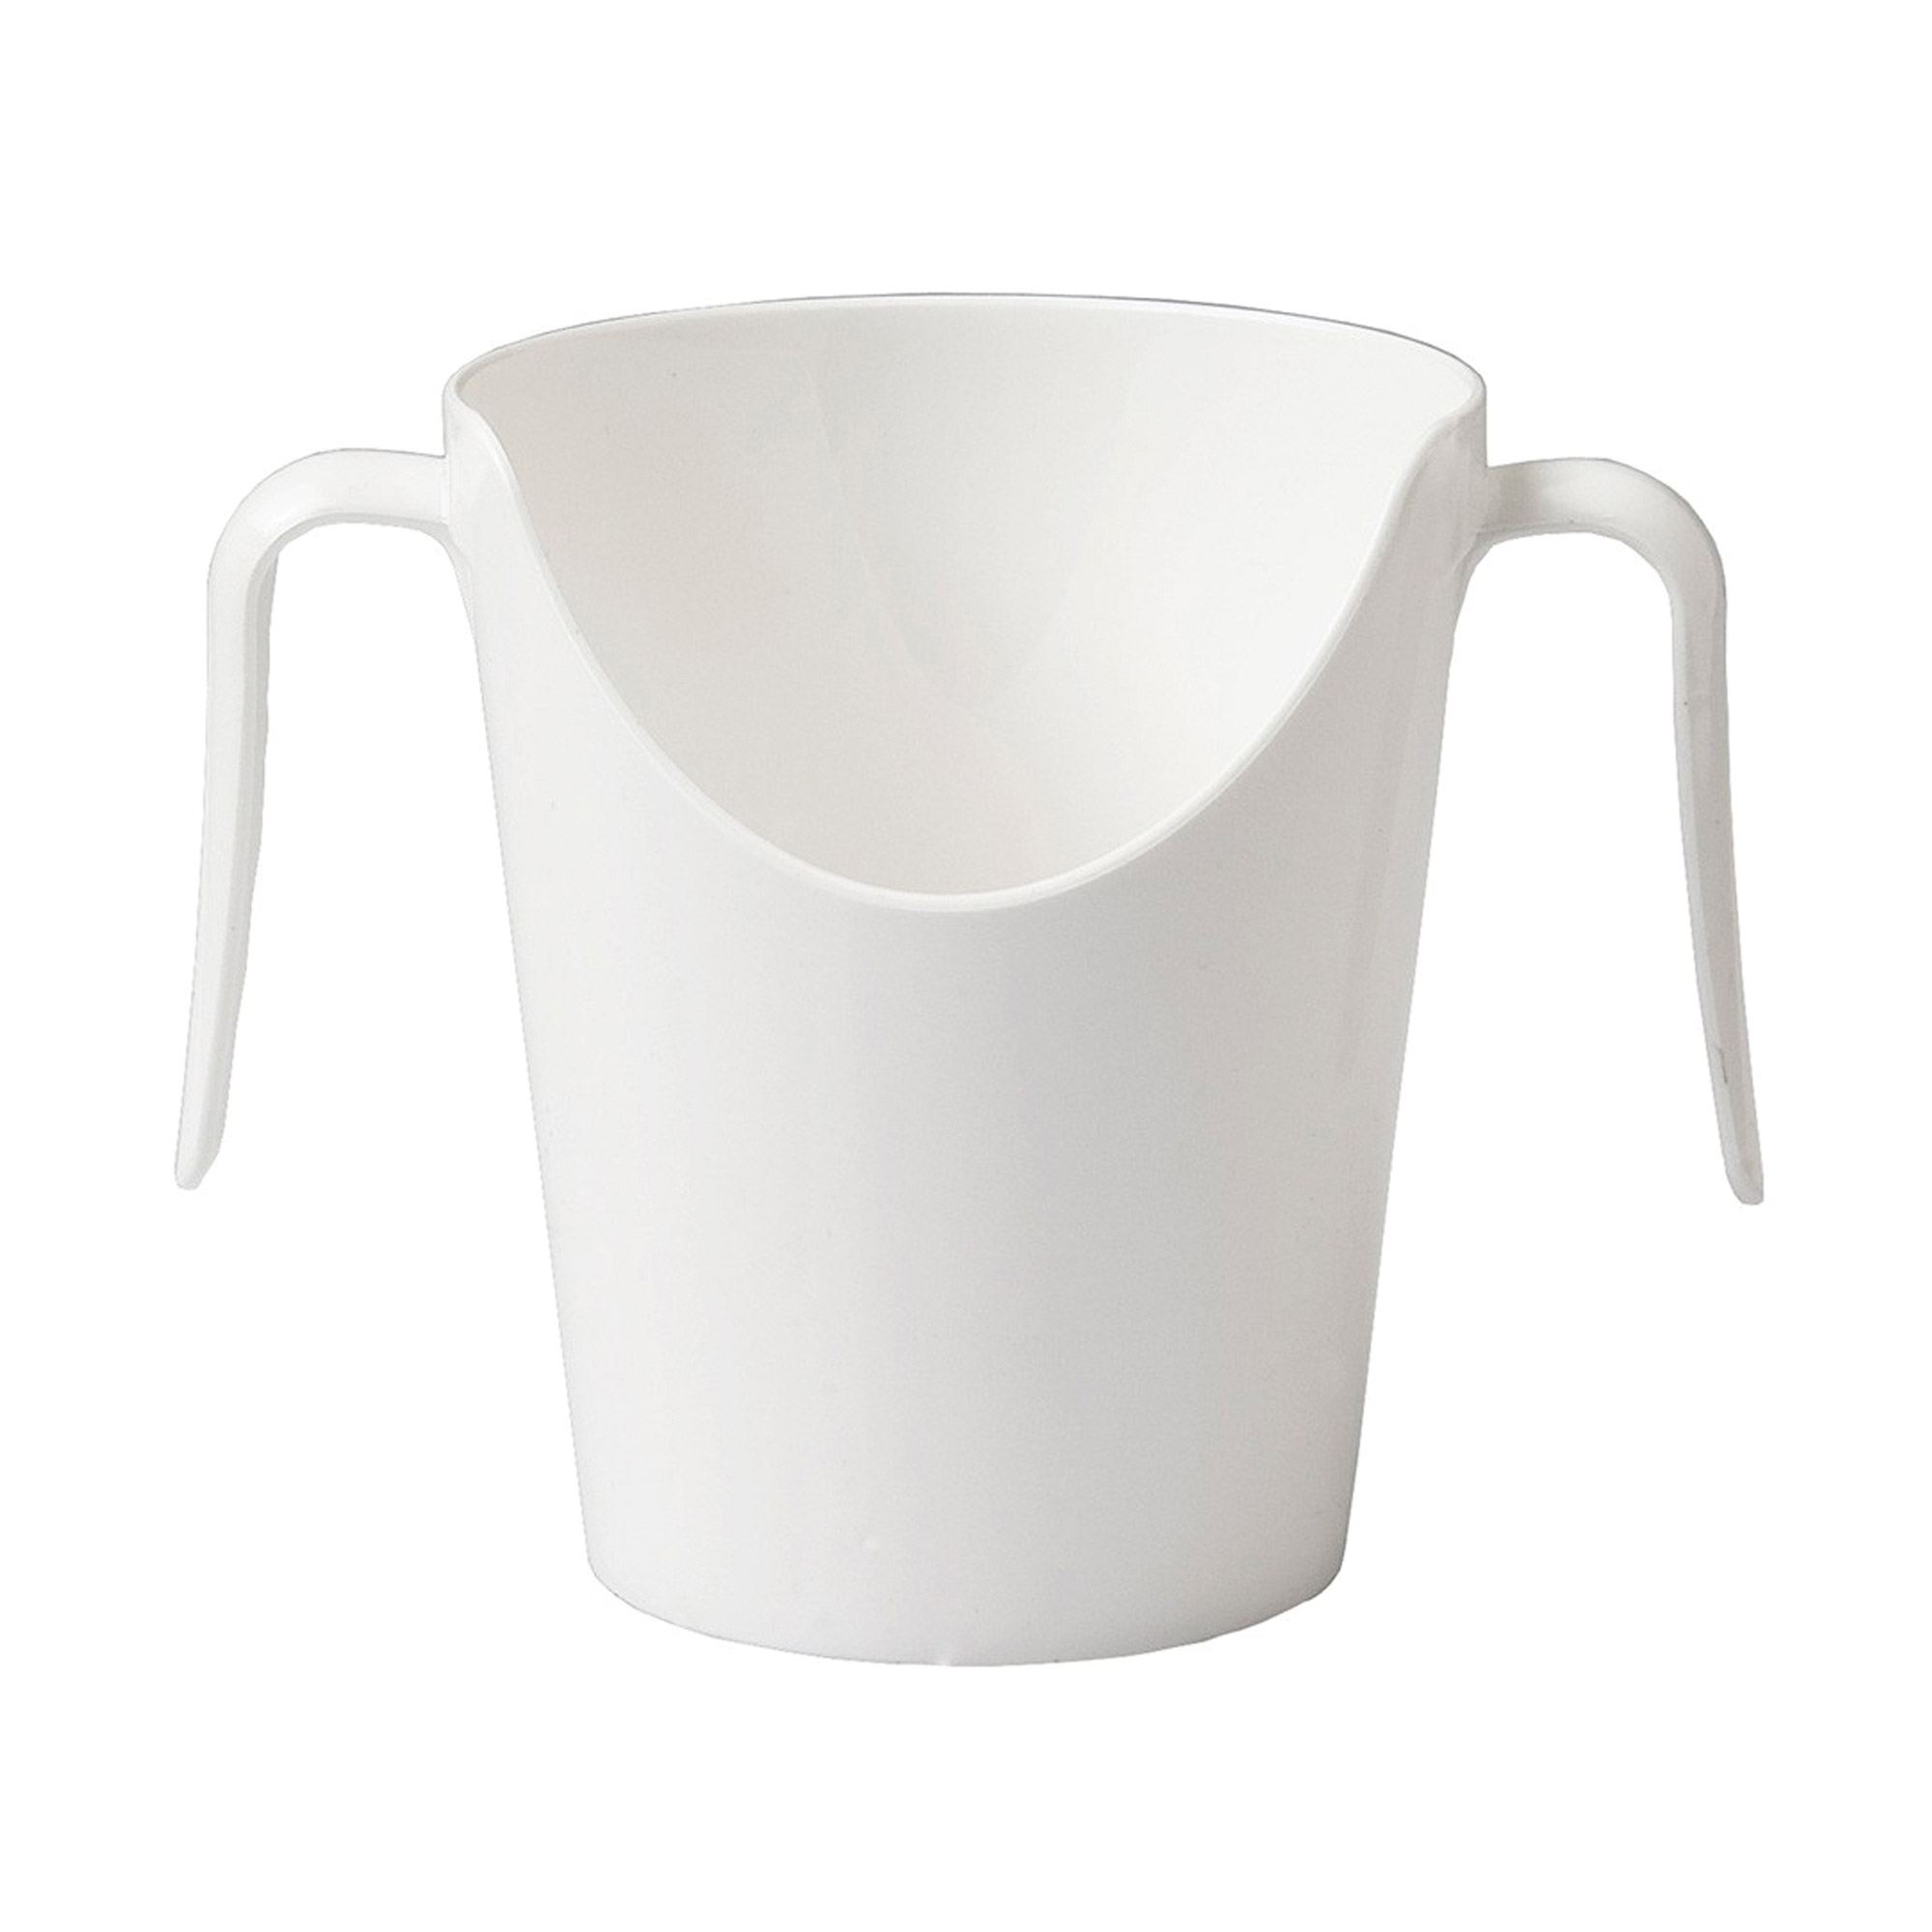 Nose Cut Out Cup (With Handles) WHITE - EACH